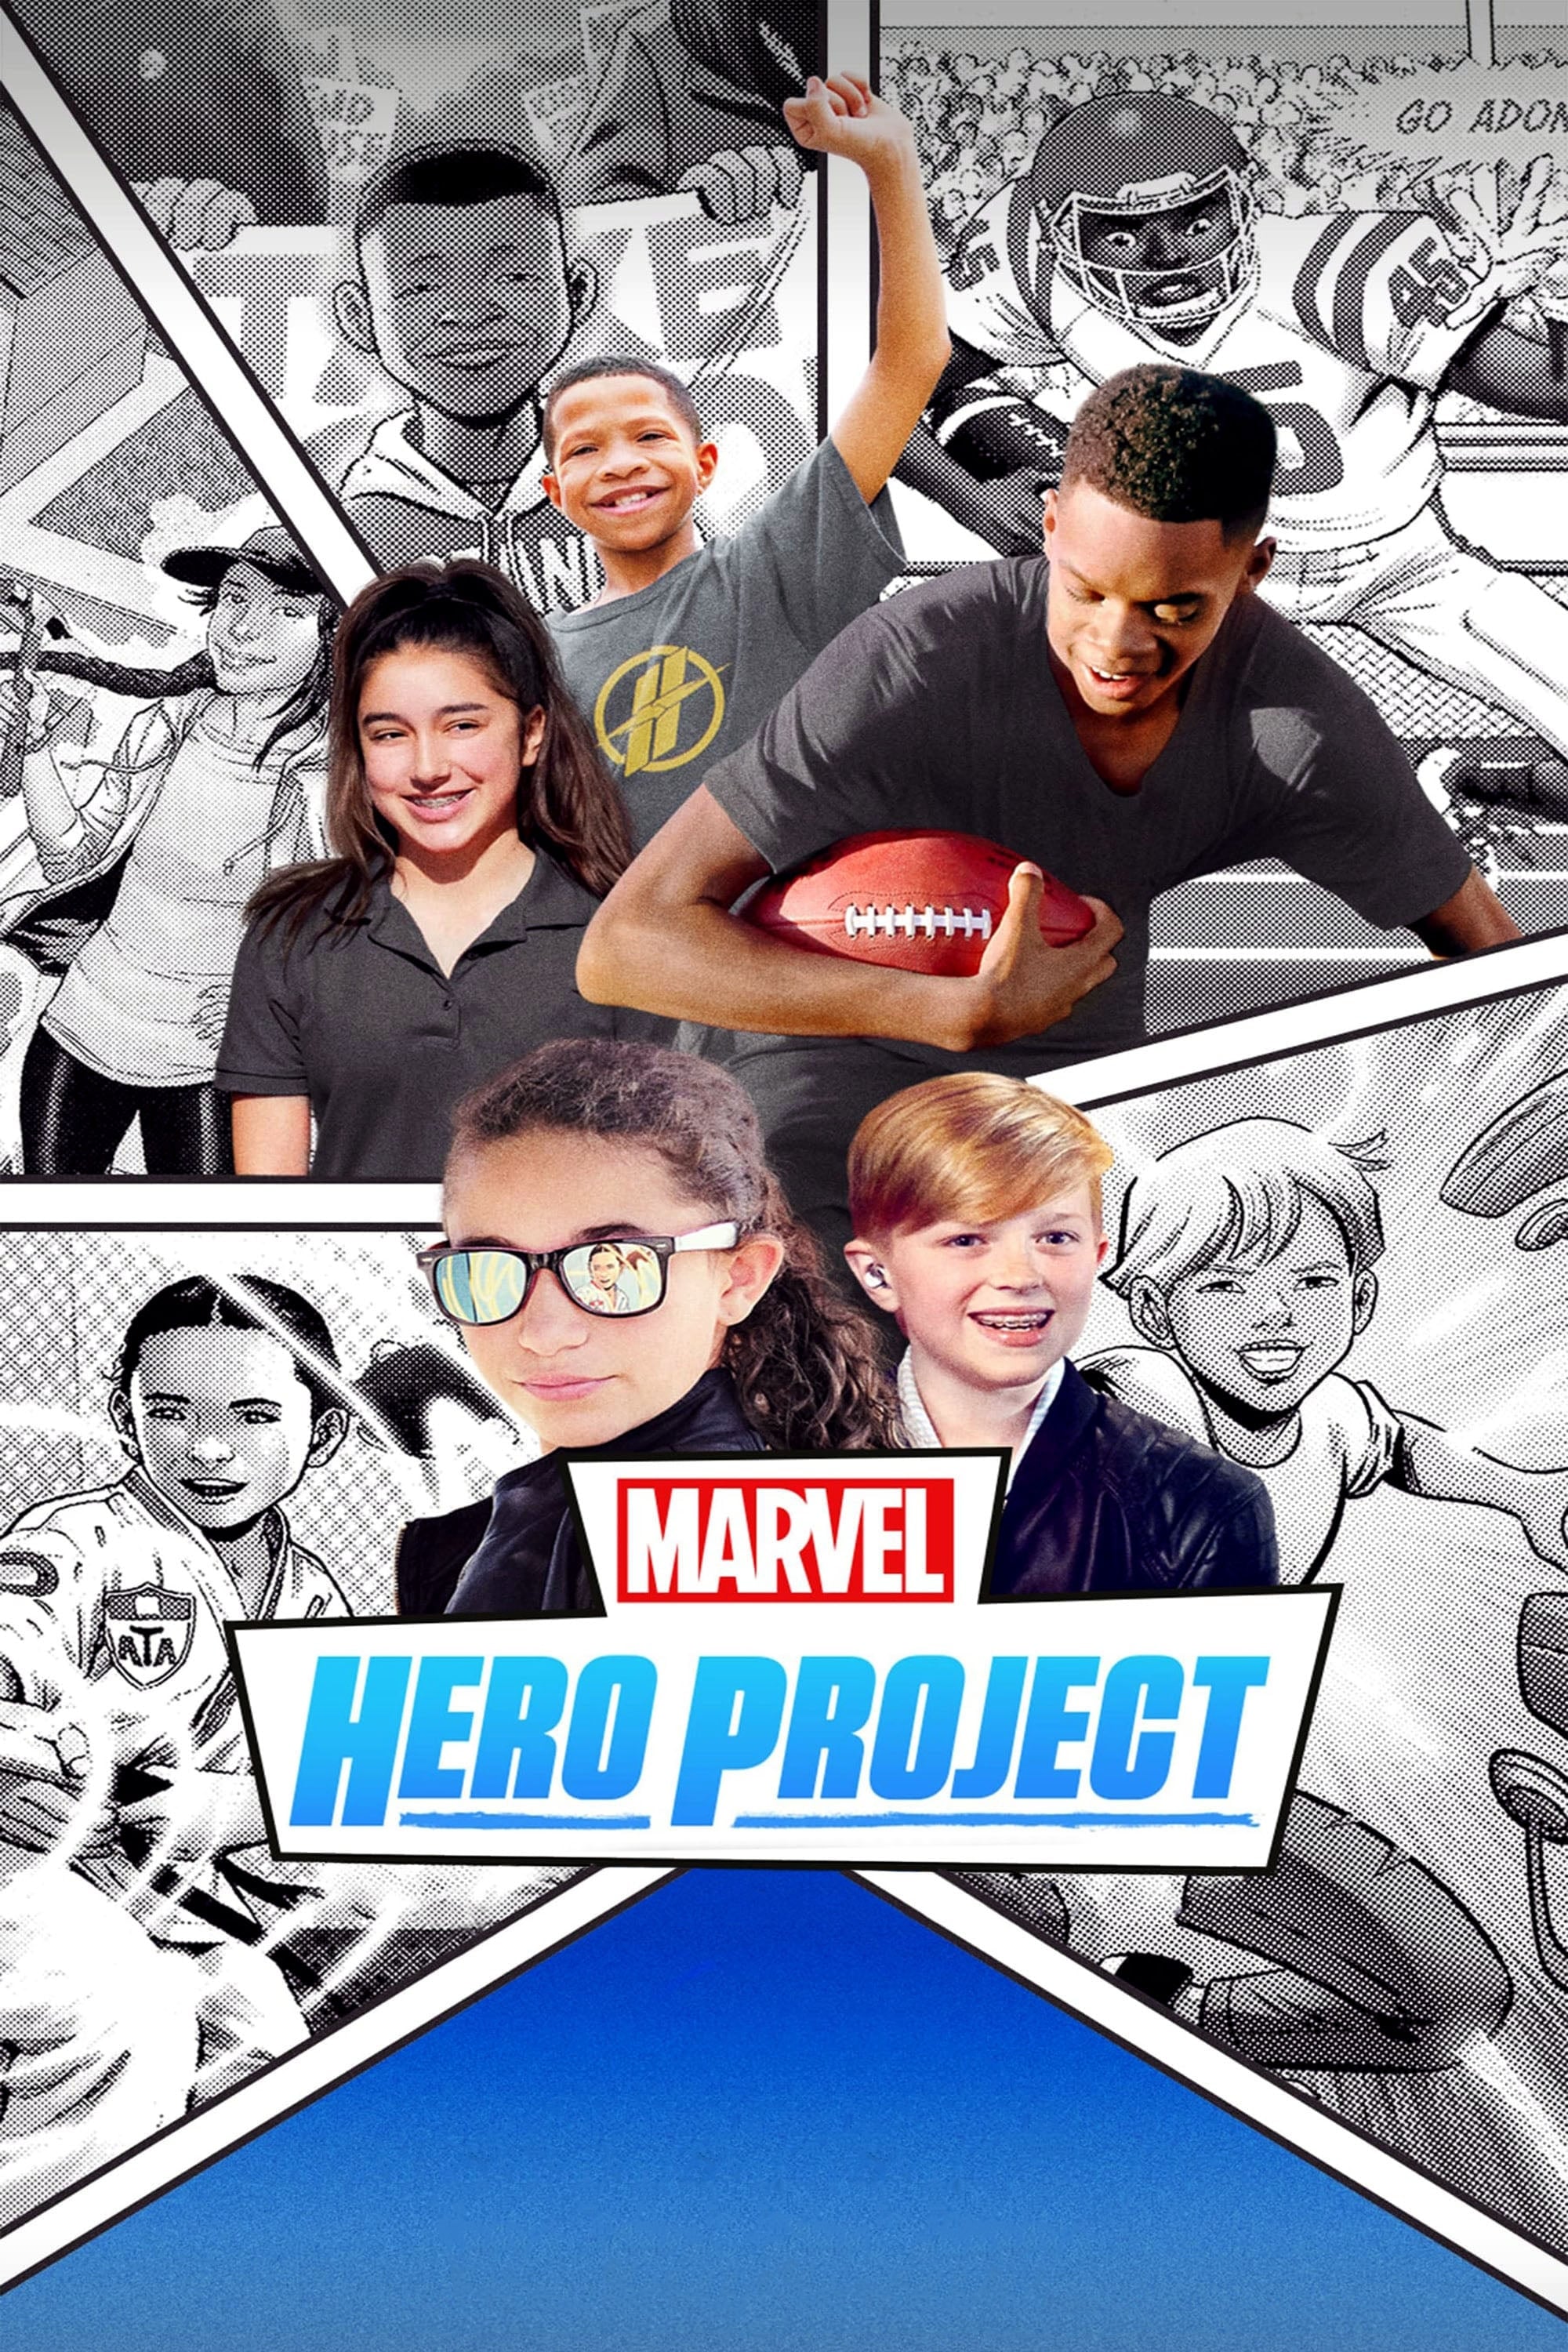 Marvel's Hero Project TV Shows About Superhero Kids